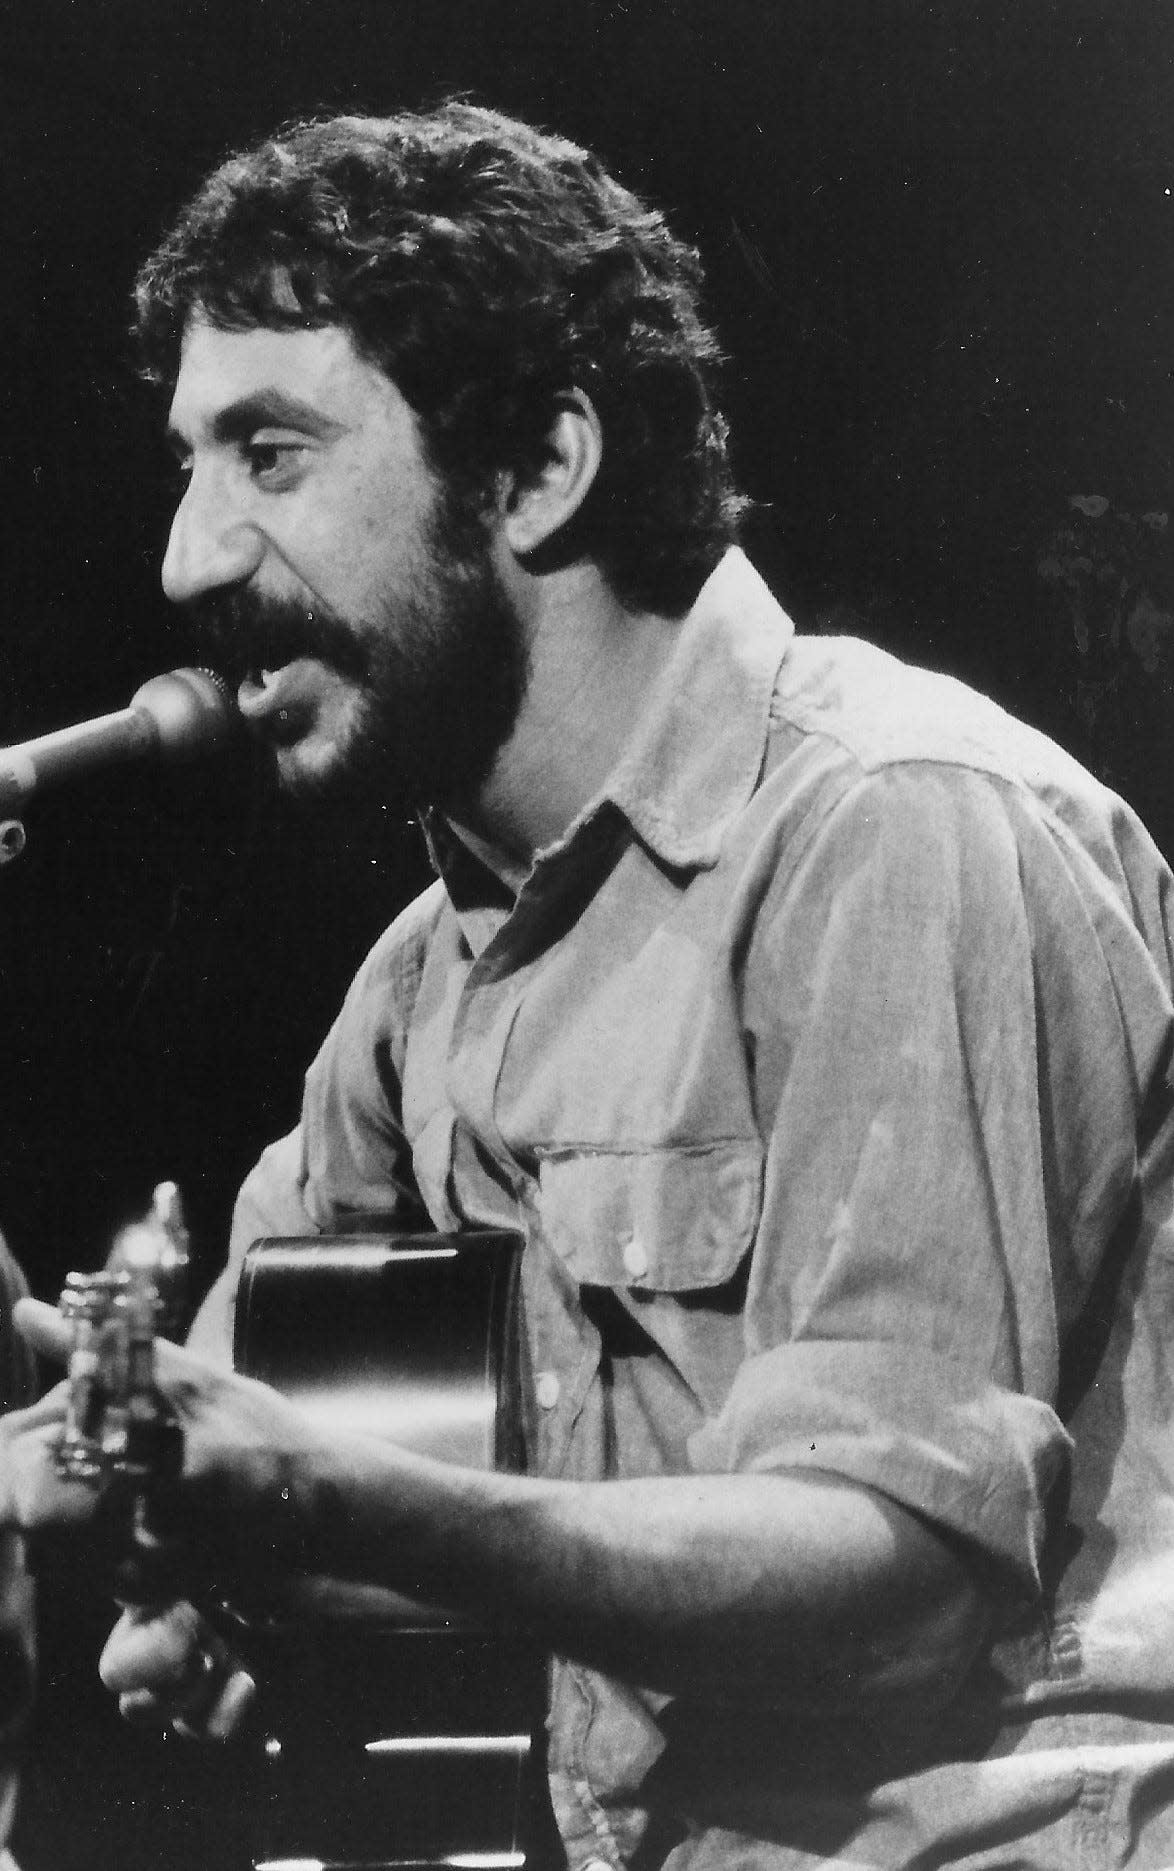 Jim Croce performs on ABC-TV’s “In Concert” in January 1973.